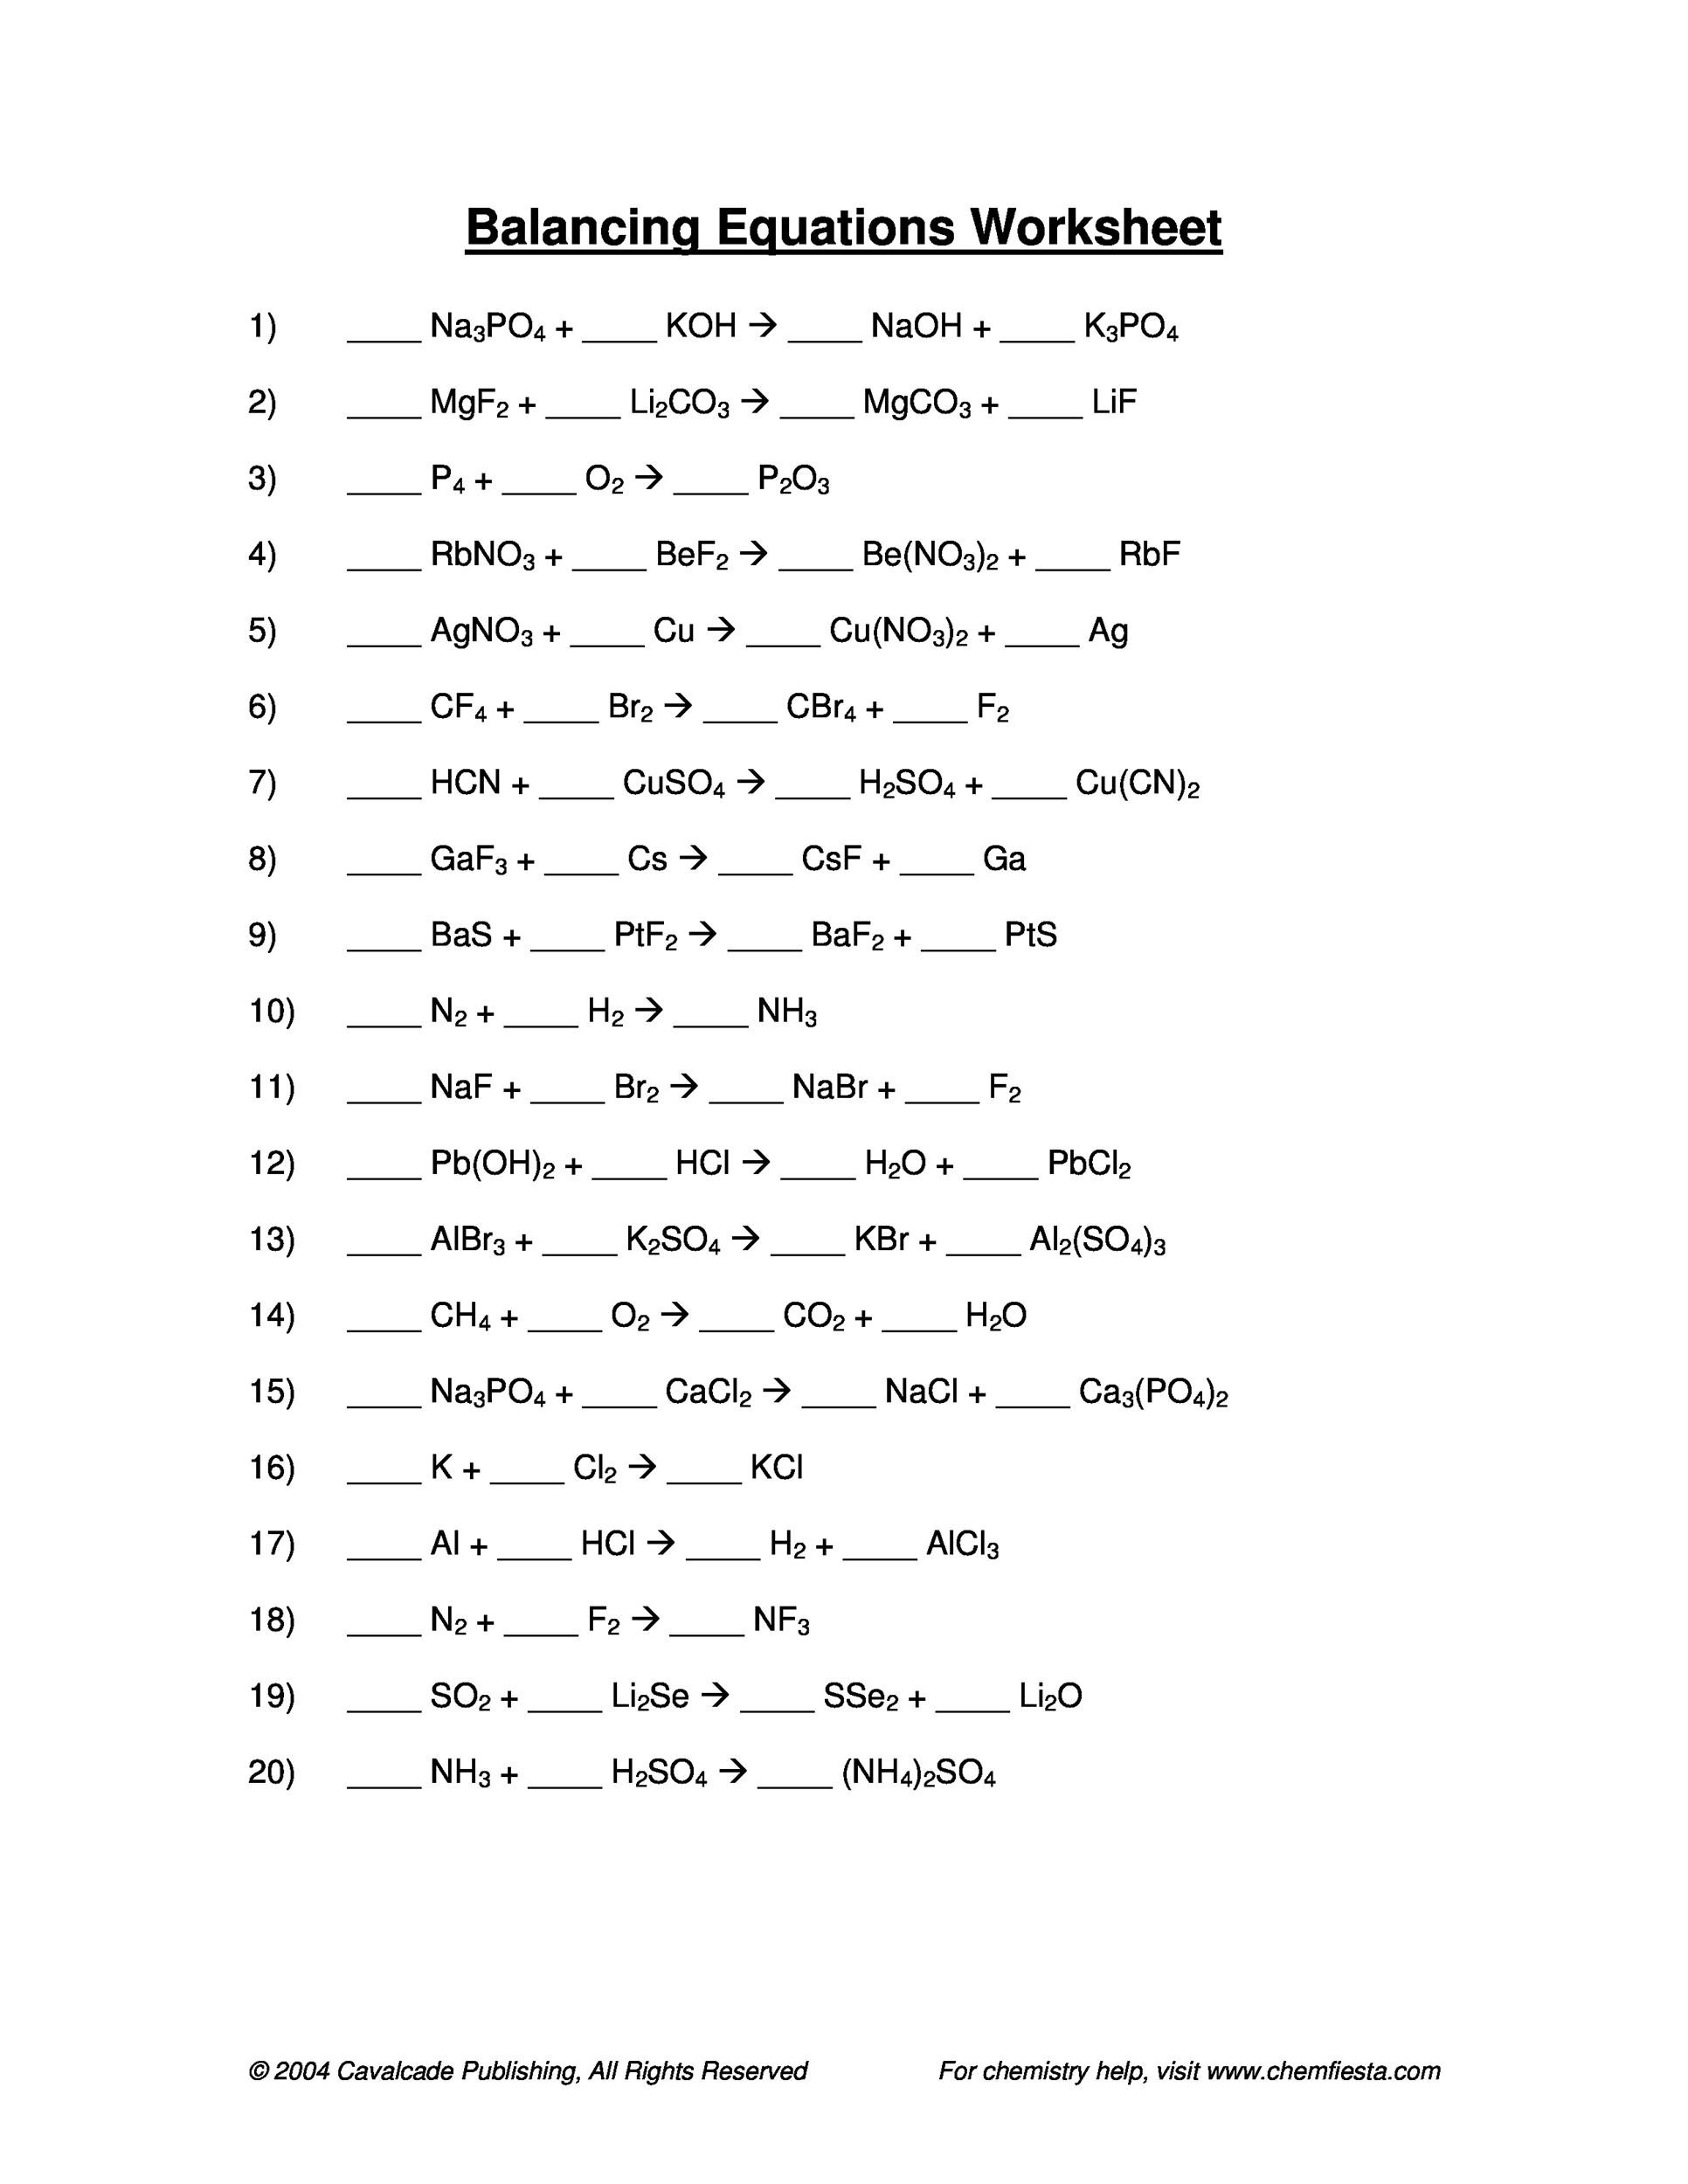 Types Of Chemical Reactions Worksheet 49 Balancing Chemical Equations Worksheets [with Answers]